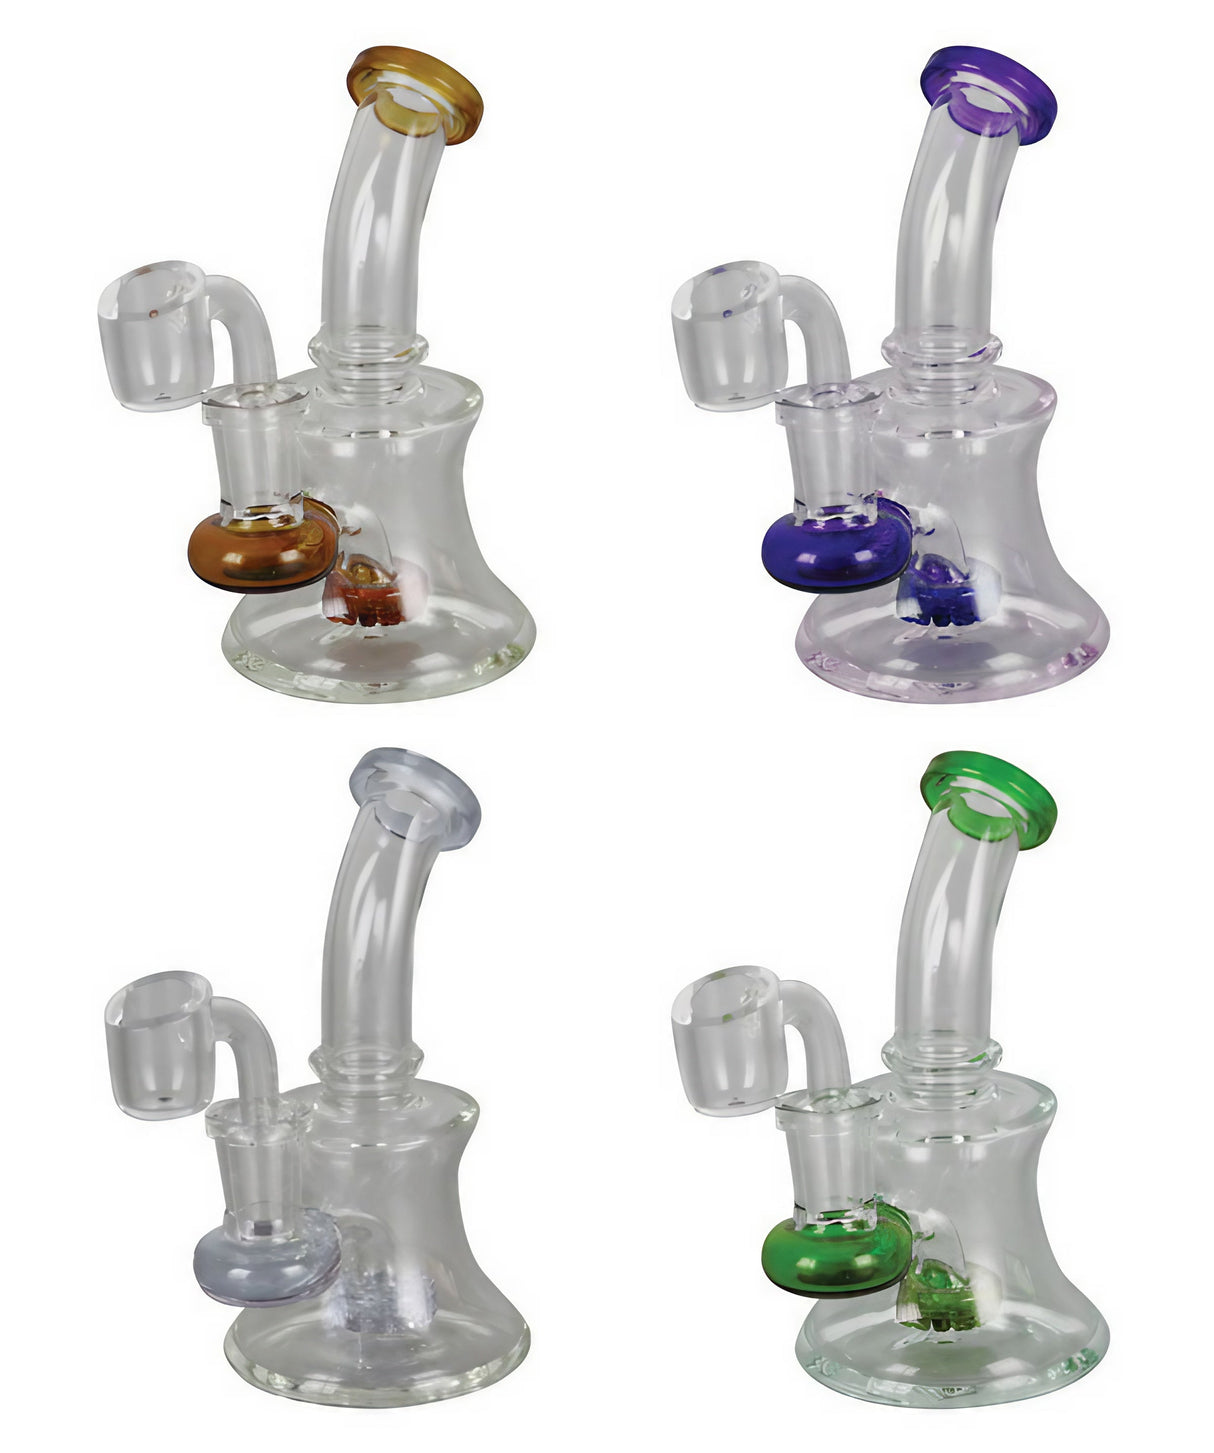 Mini Hour Glass Oil Rigs in various colors with compact design, ideal for concentrates, 5.25" height